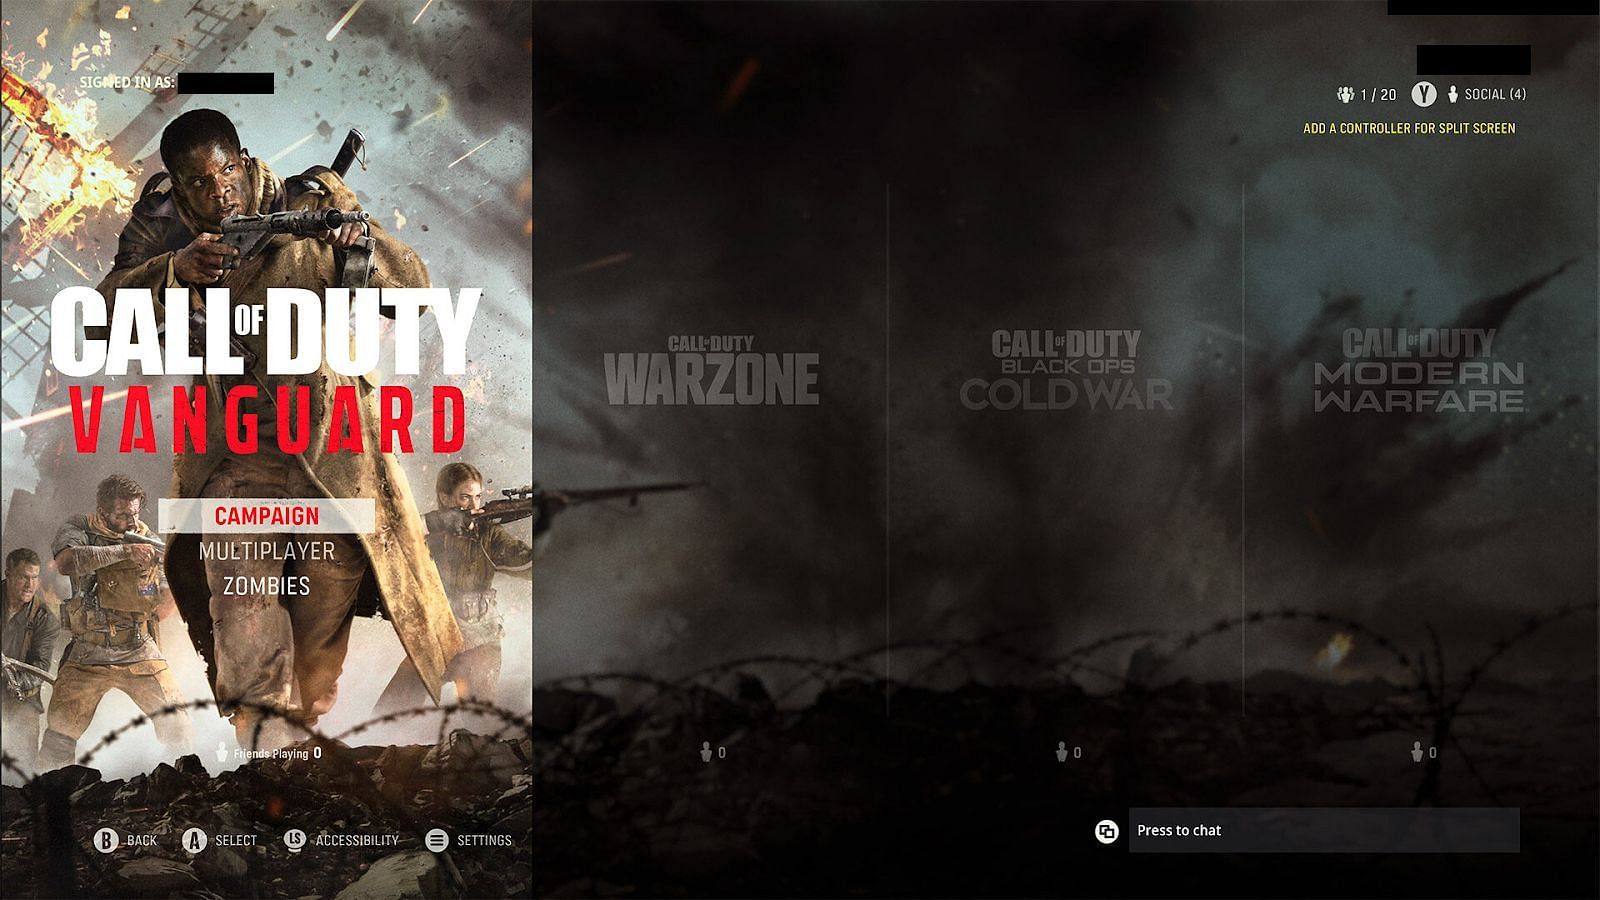 Current menu with Vanguard, Warzone, Black Ops Cold War, and Modern Warfare (Image by Activision)